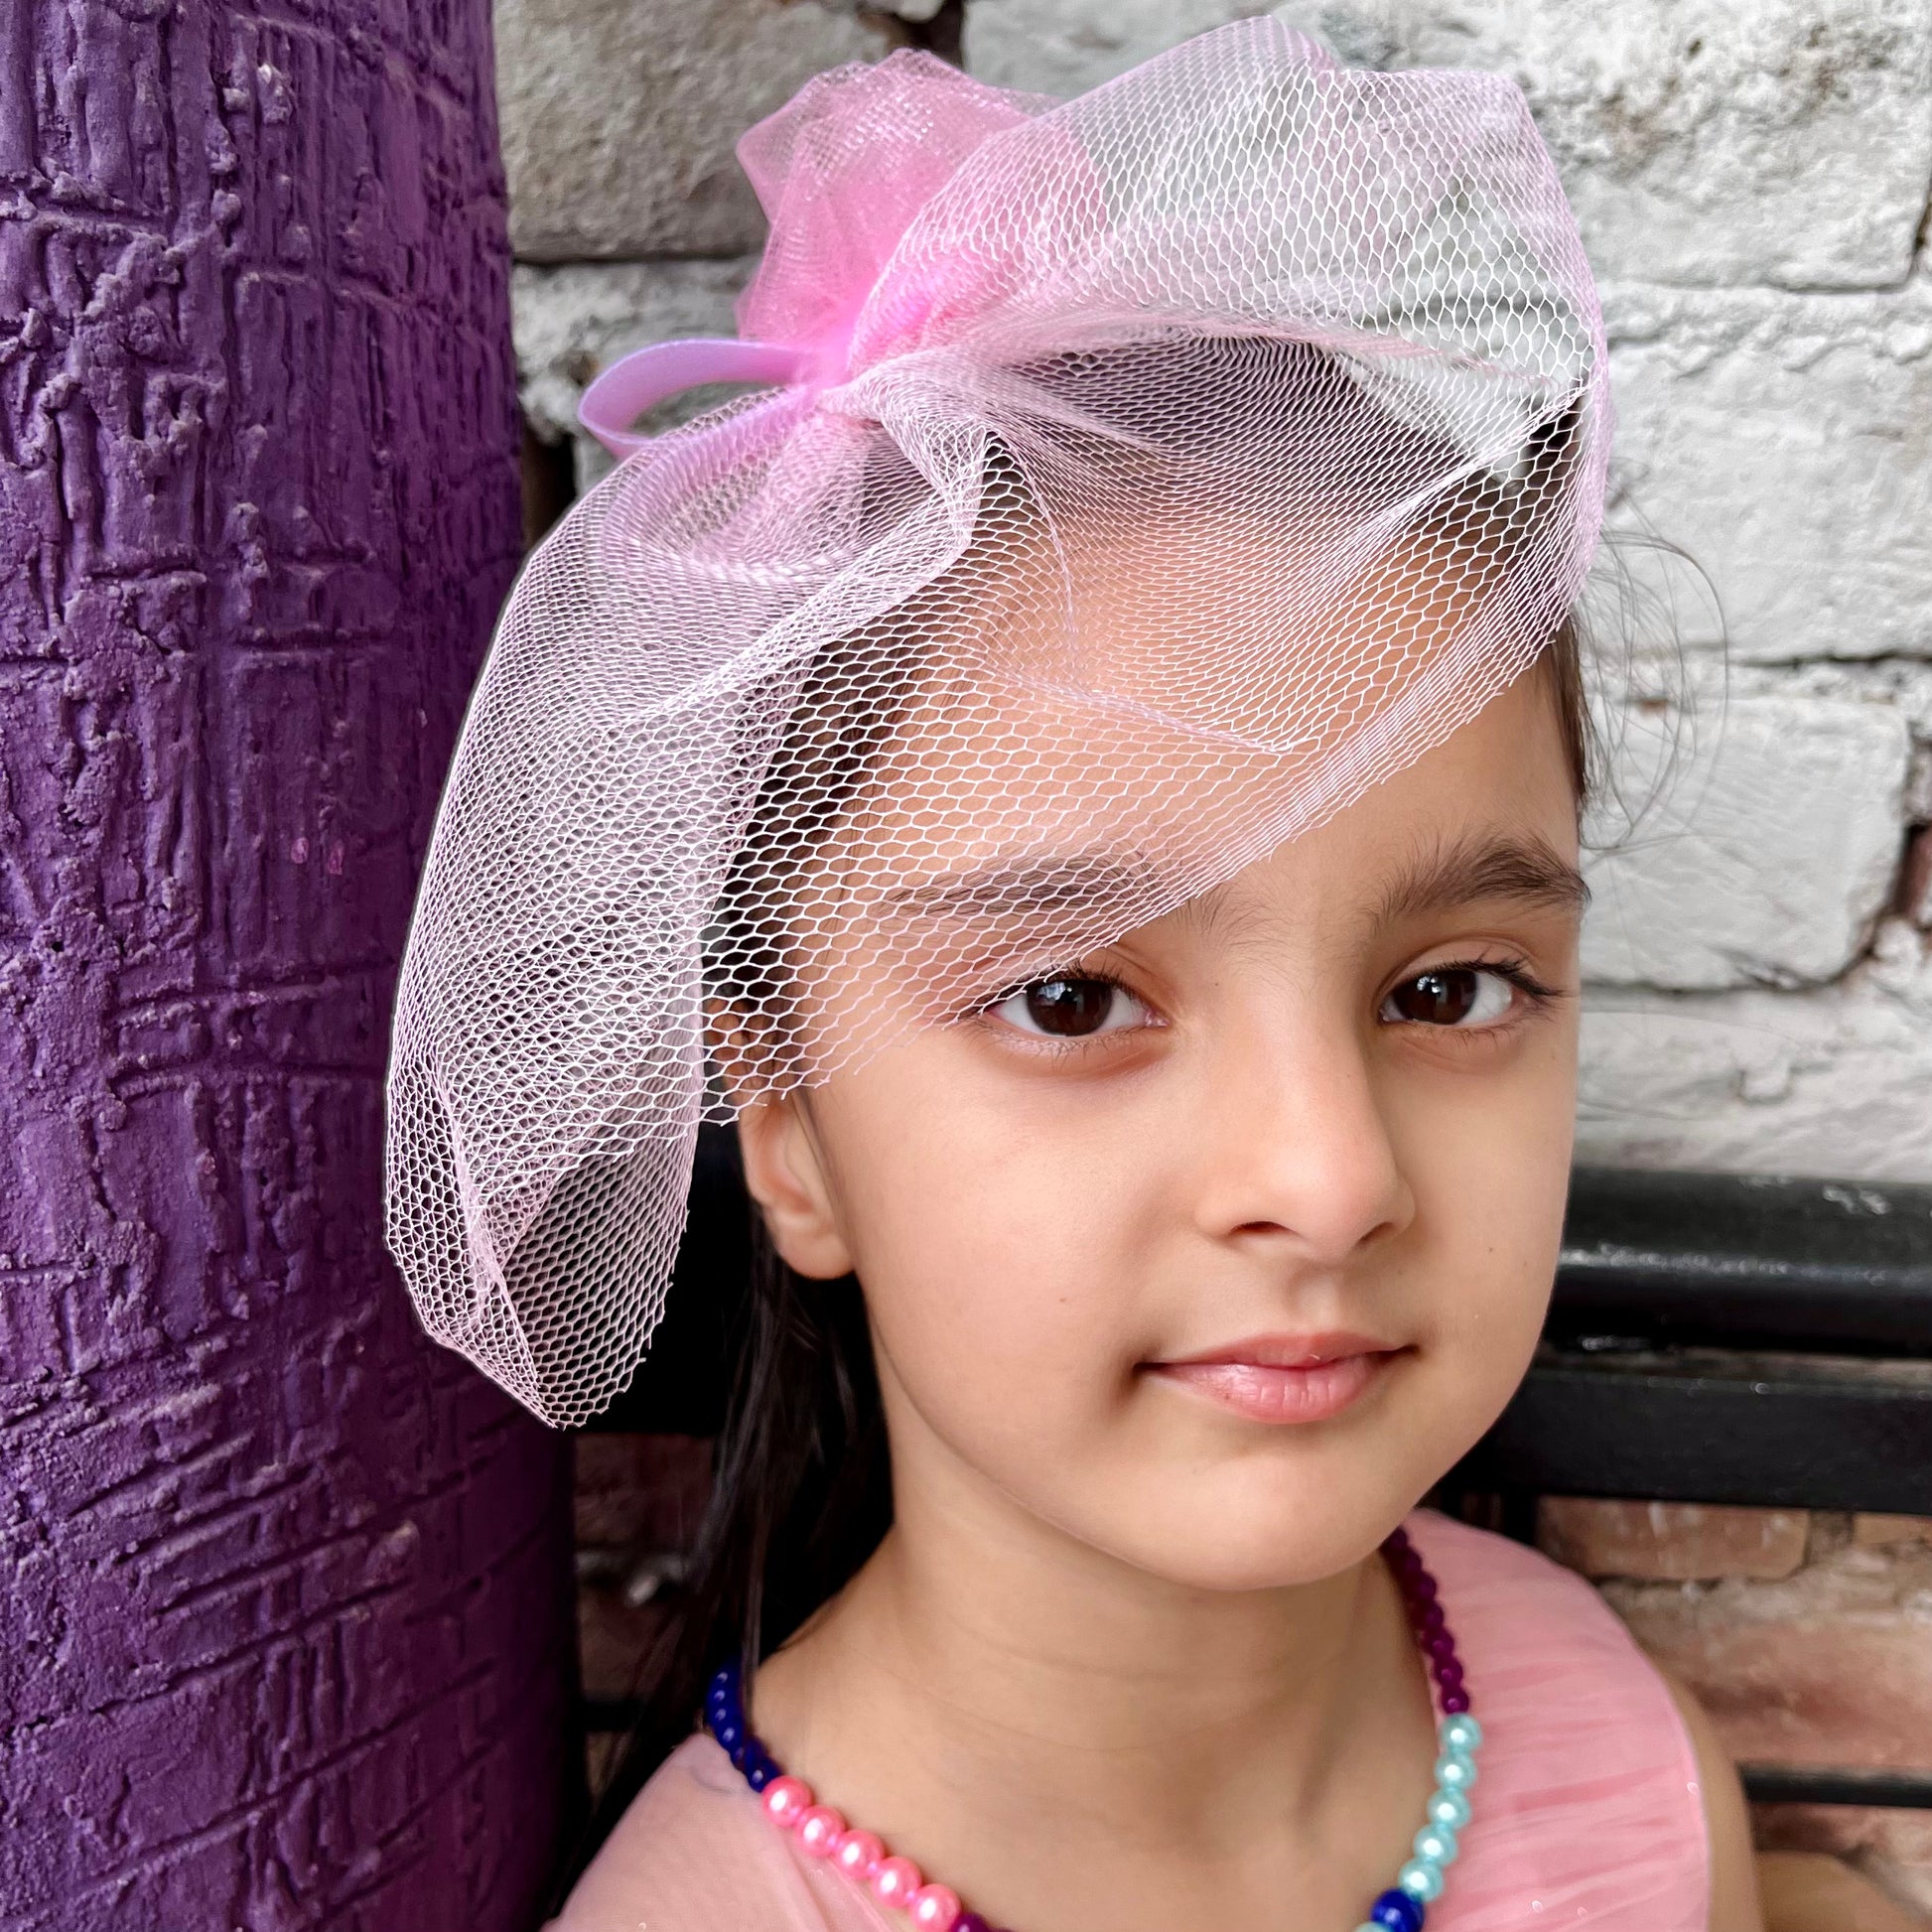 SERENITY Pink Veil Fascinator | Millinery Couture Girls Hair Clip